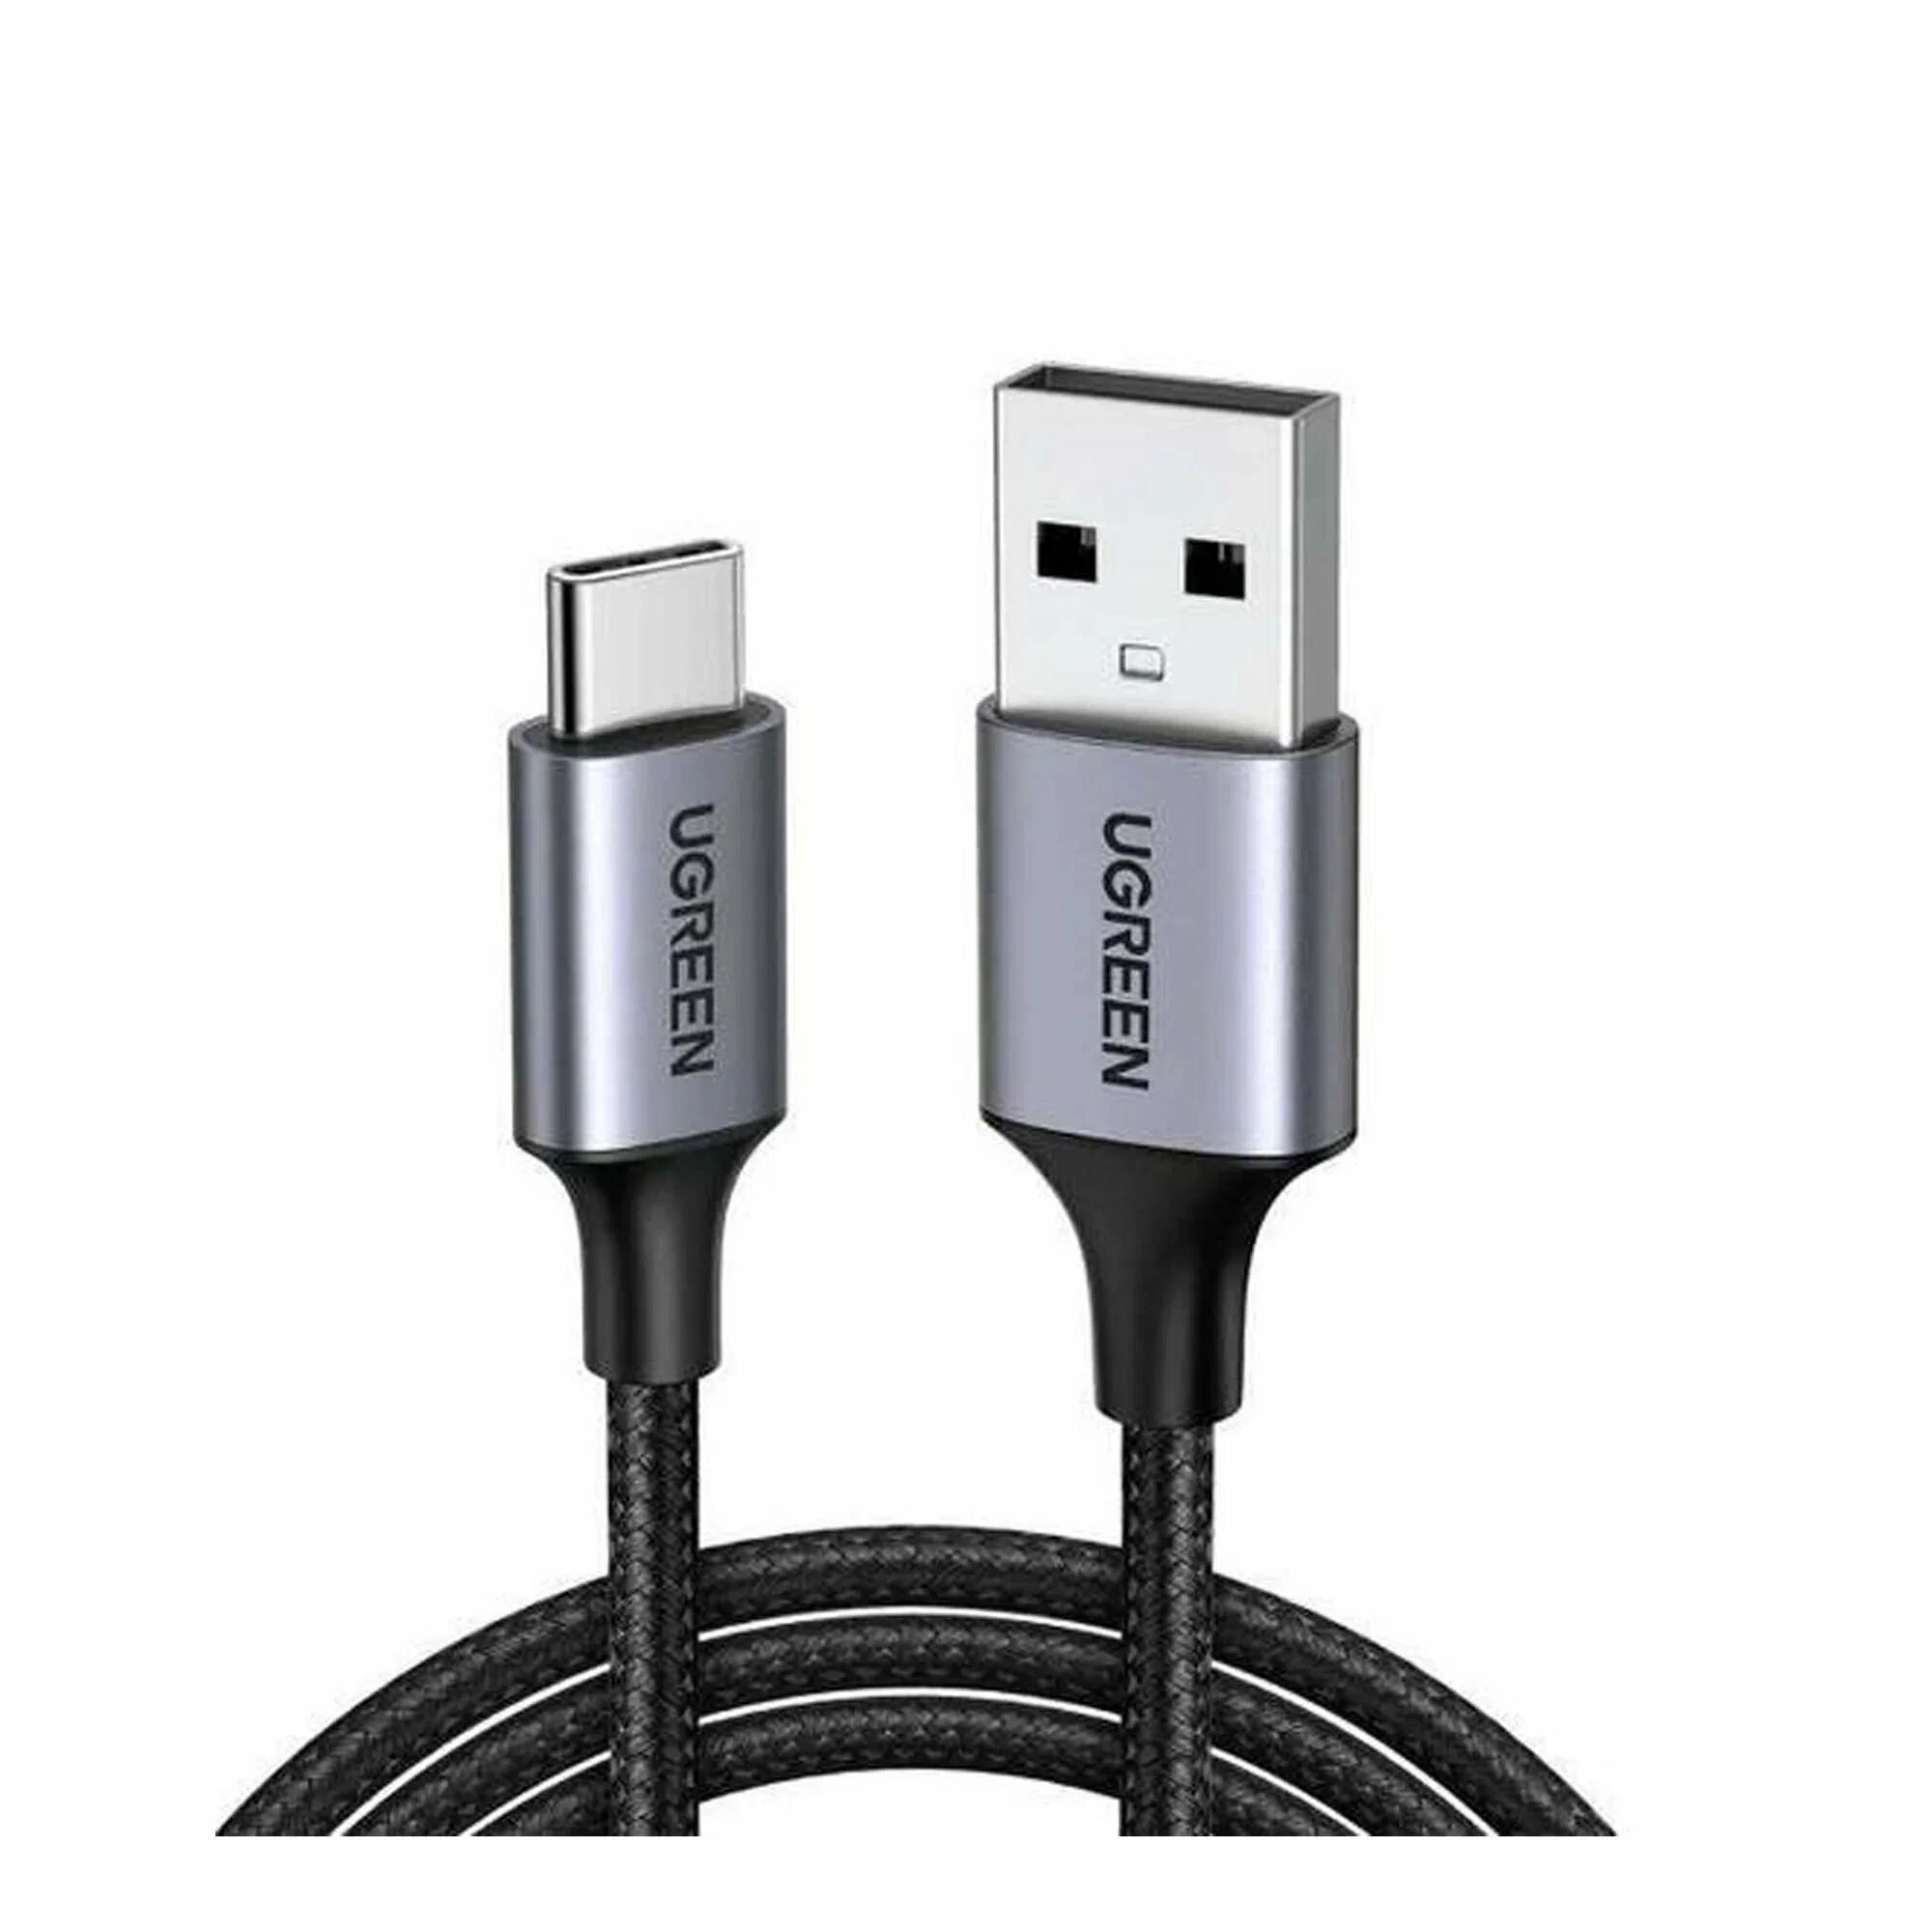 UGREEN USB-C MALE TO USB 2.0 A  MALE CABLE 1.5M (60127)